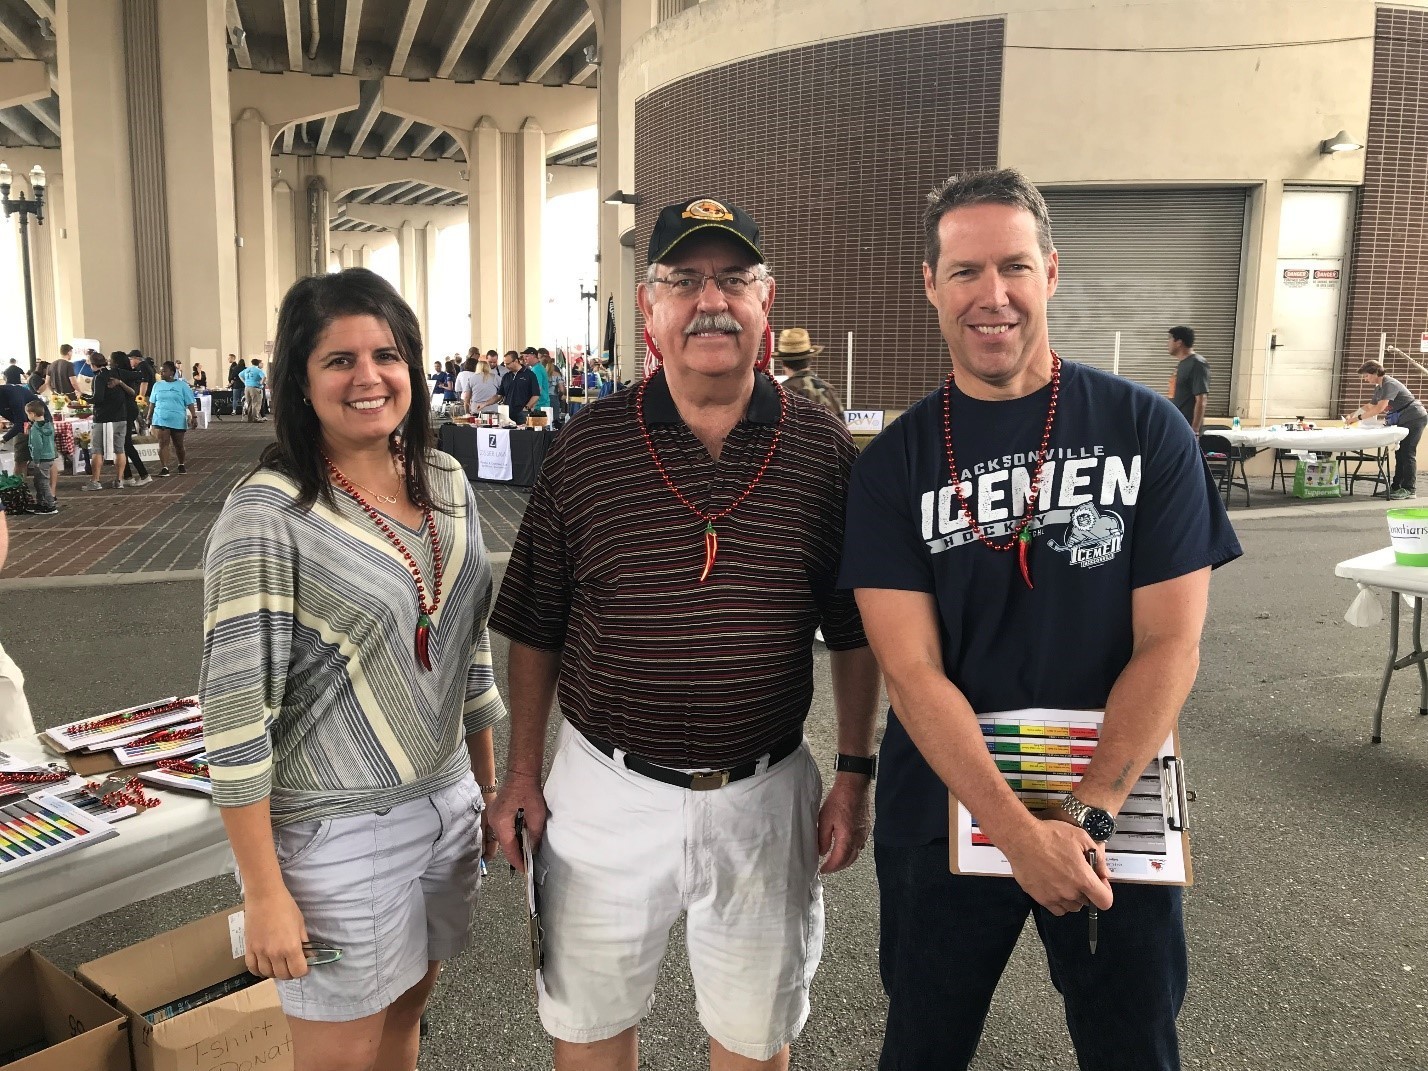 Cook-off judges Duval County Judges Michelle Kalil and Ronald Higbee and Circuit Judge John Guy at the 2018 Charity Chili Cook-off.